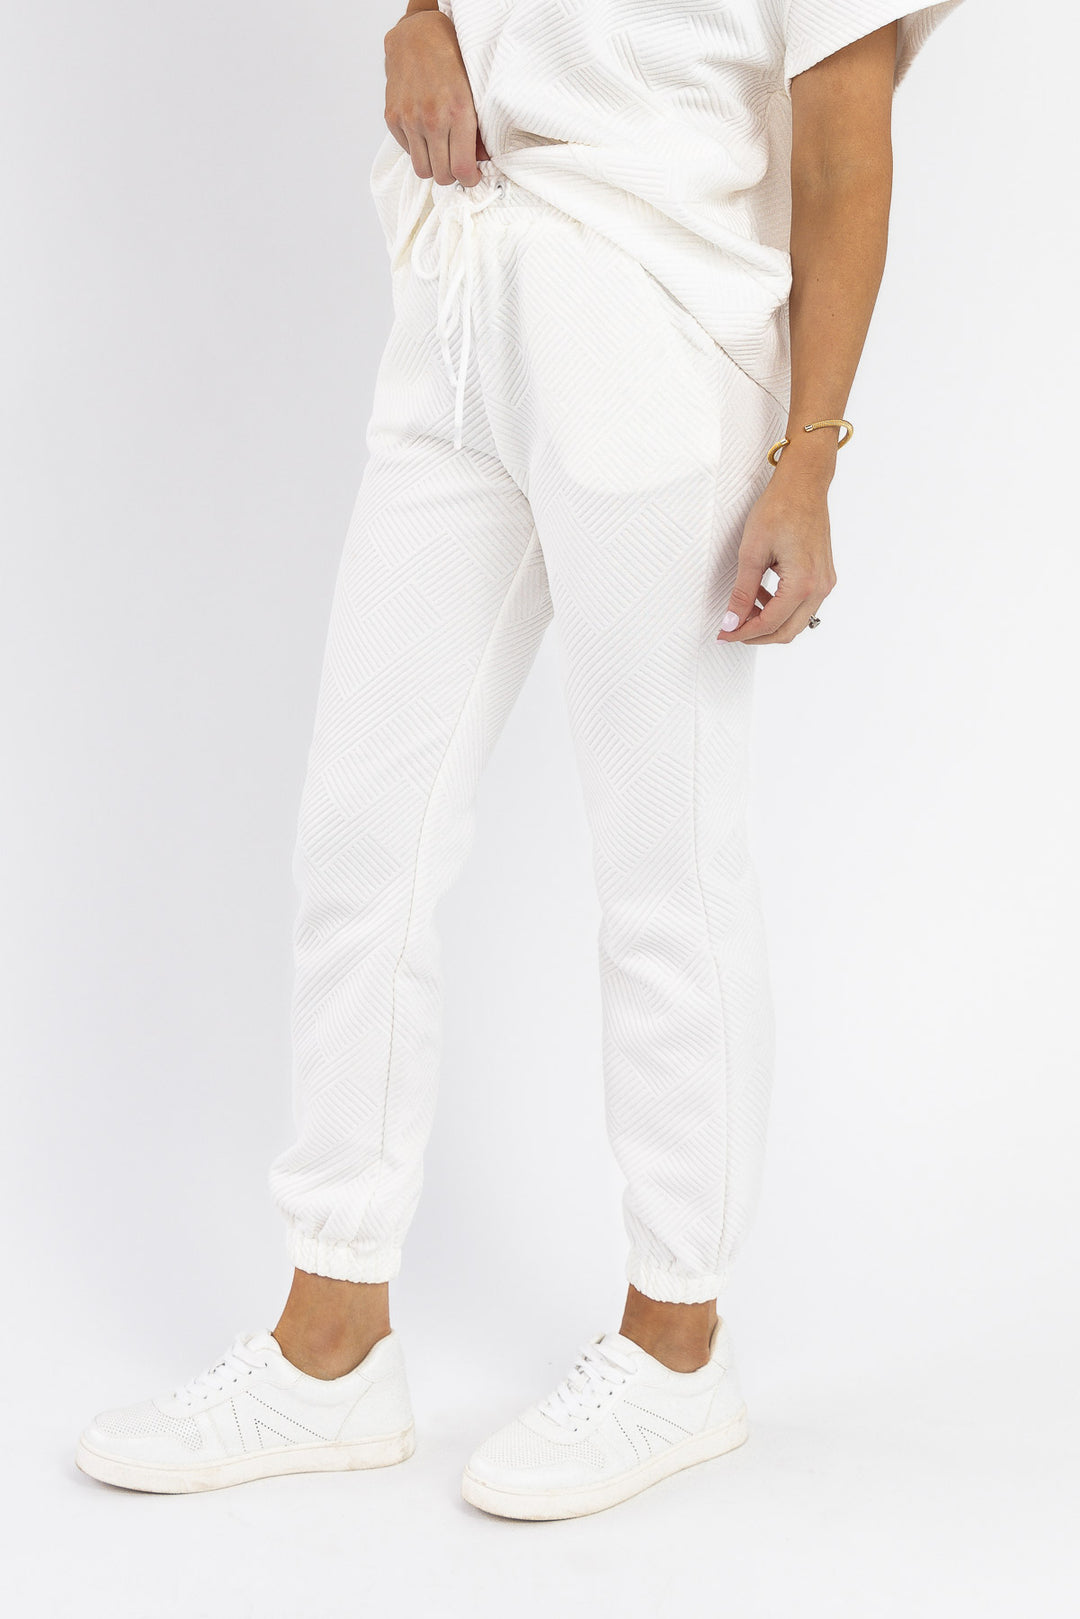 Weekend Vibe White Jogger - Final Sale